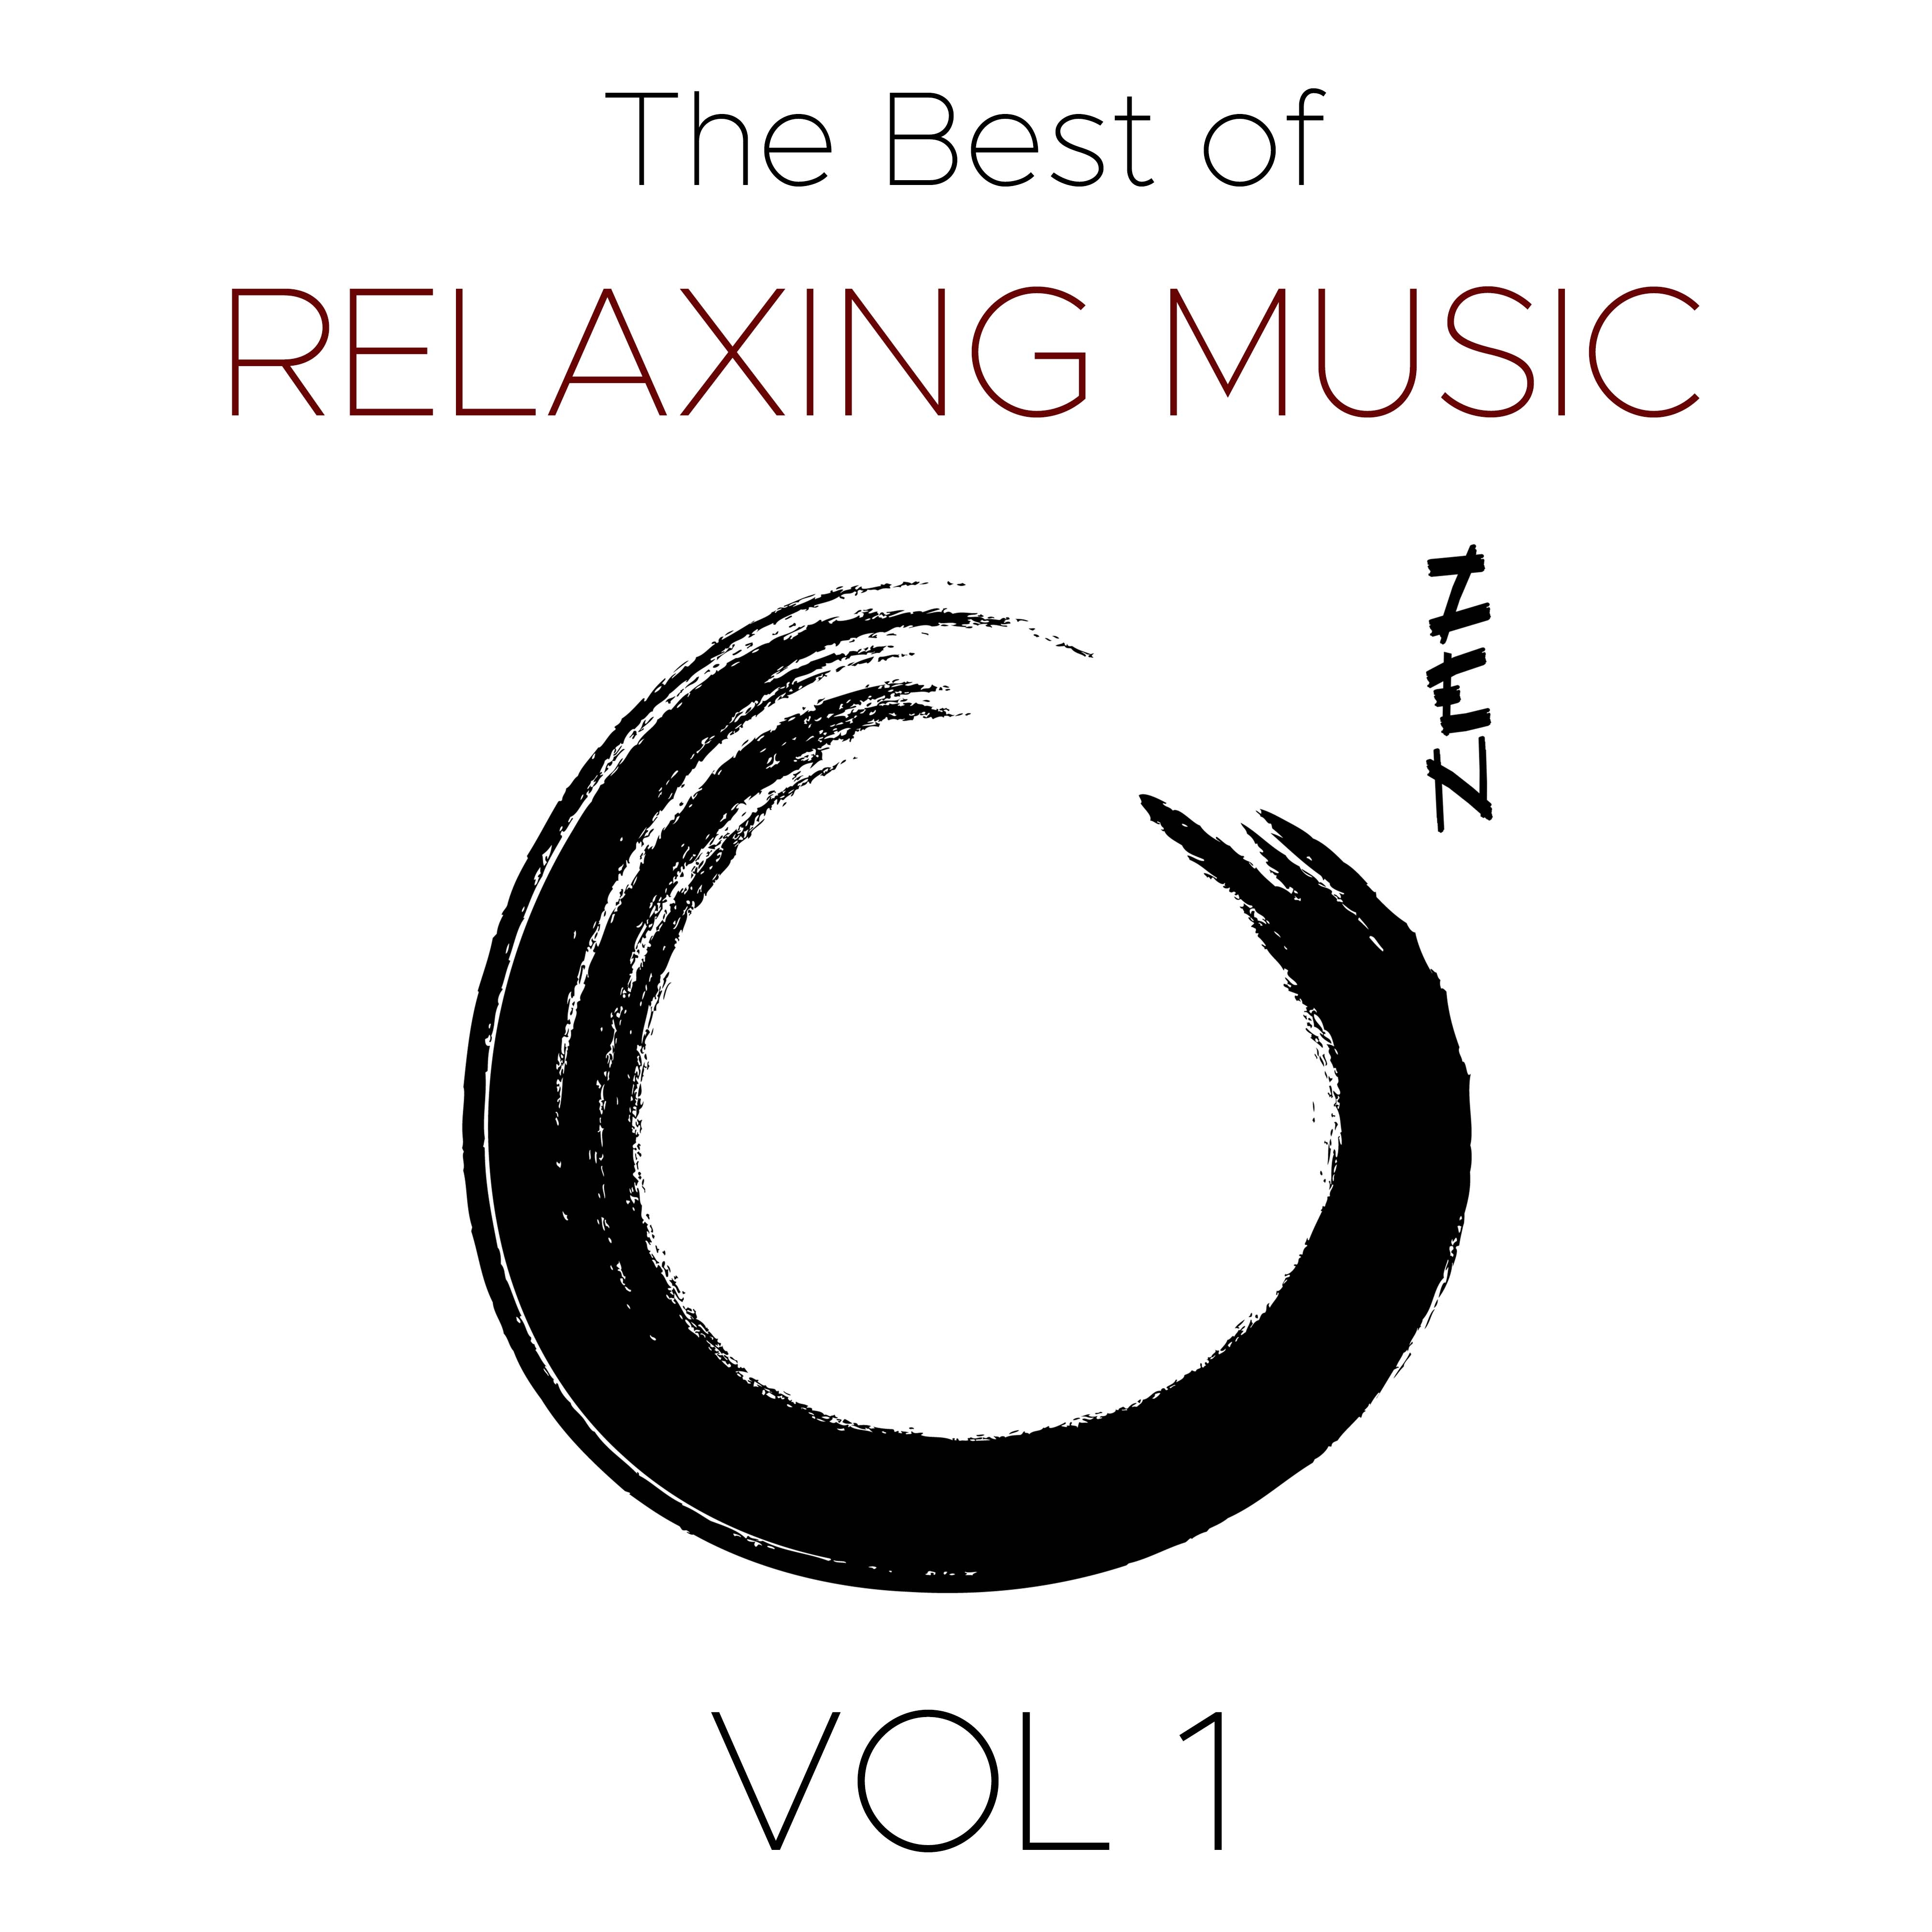 The Best of Relaxing Music Vol 1 - Sounds of Nature for Relaxation, Inner Peace and Moments of Quiet Reflection